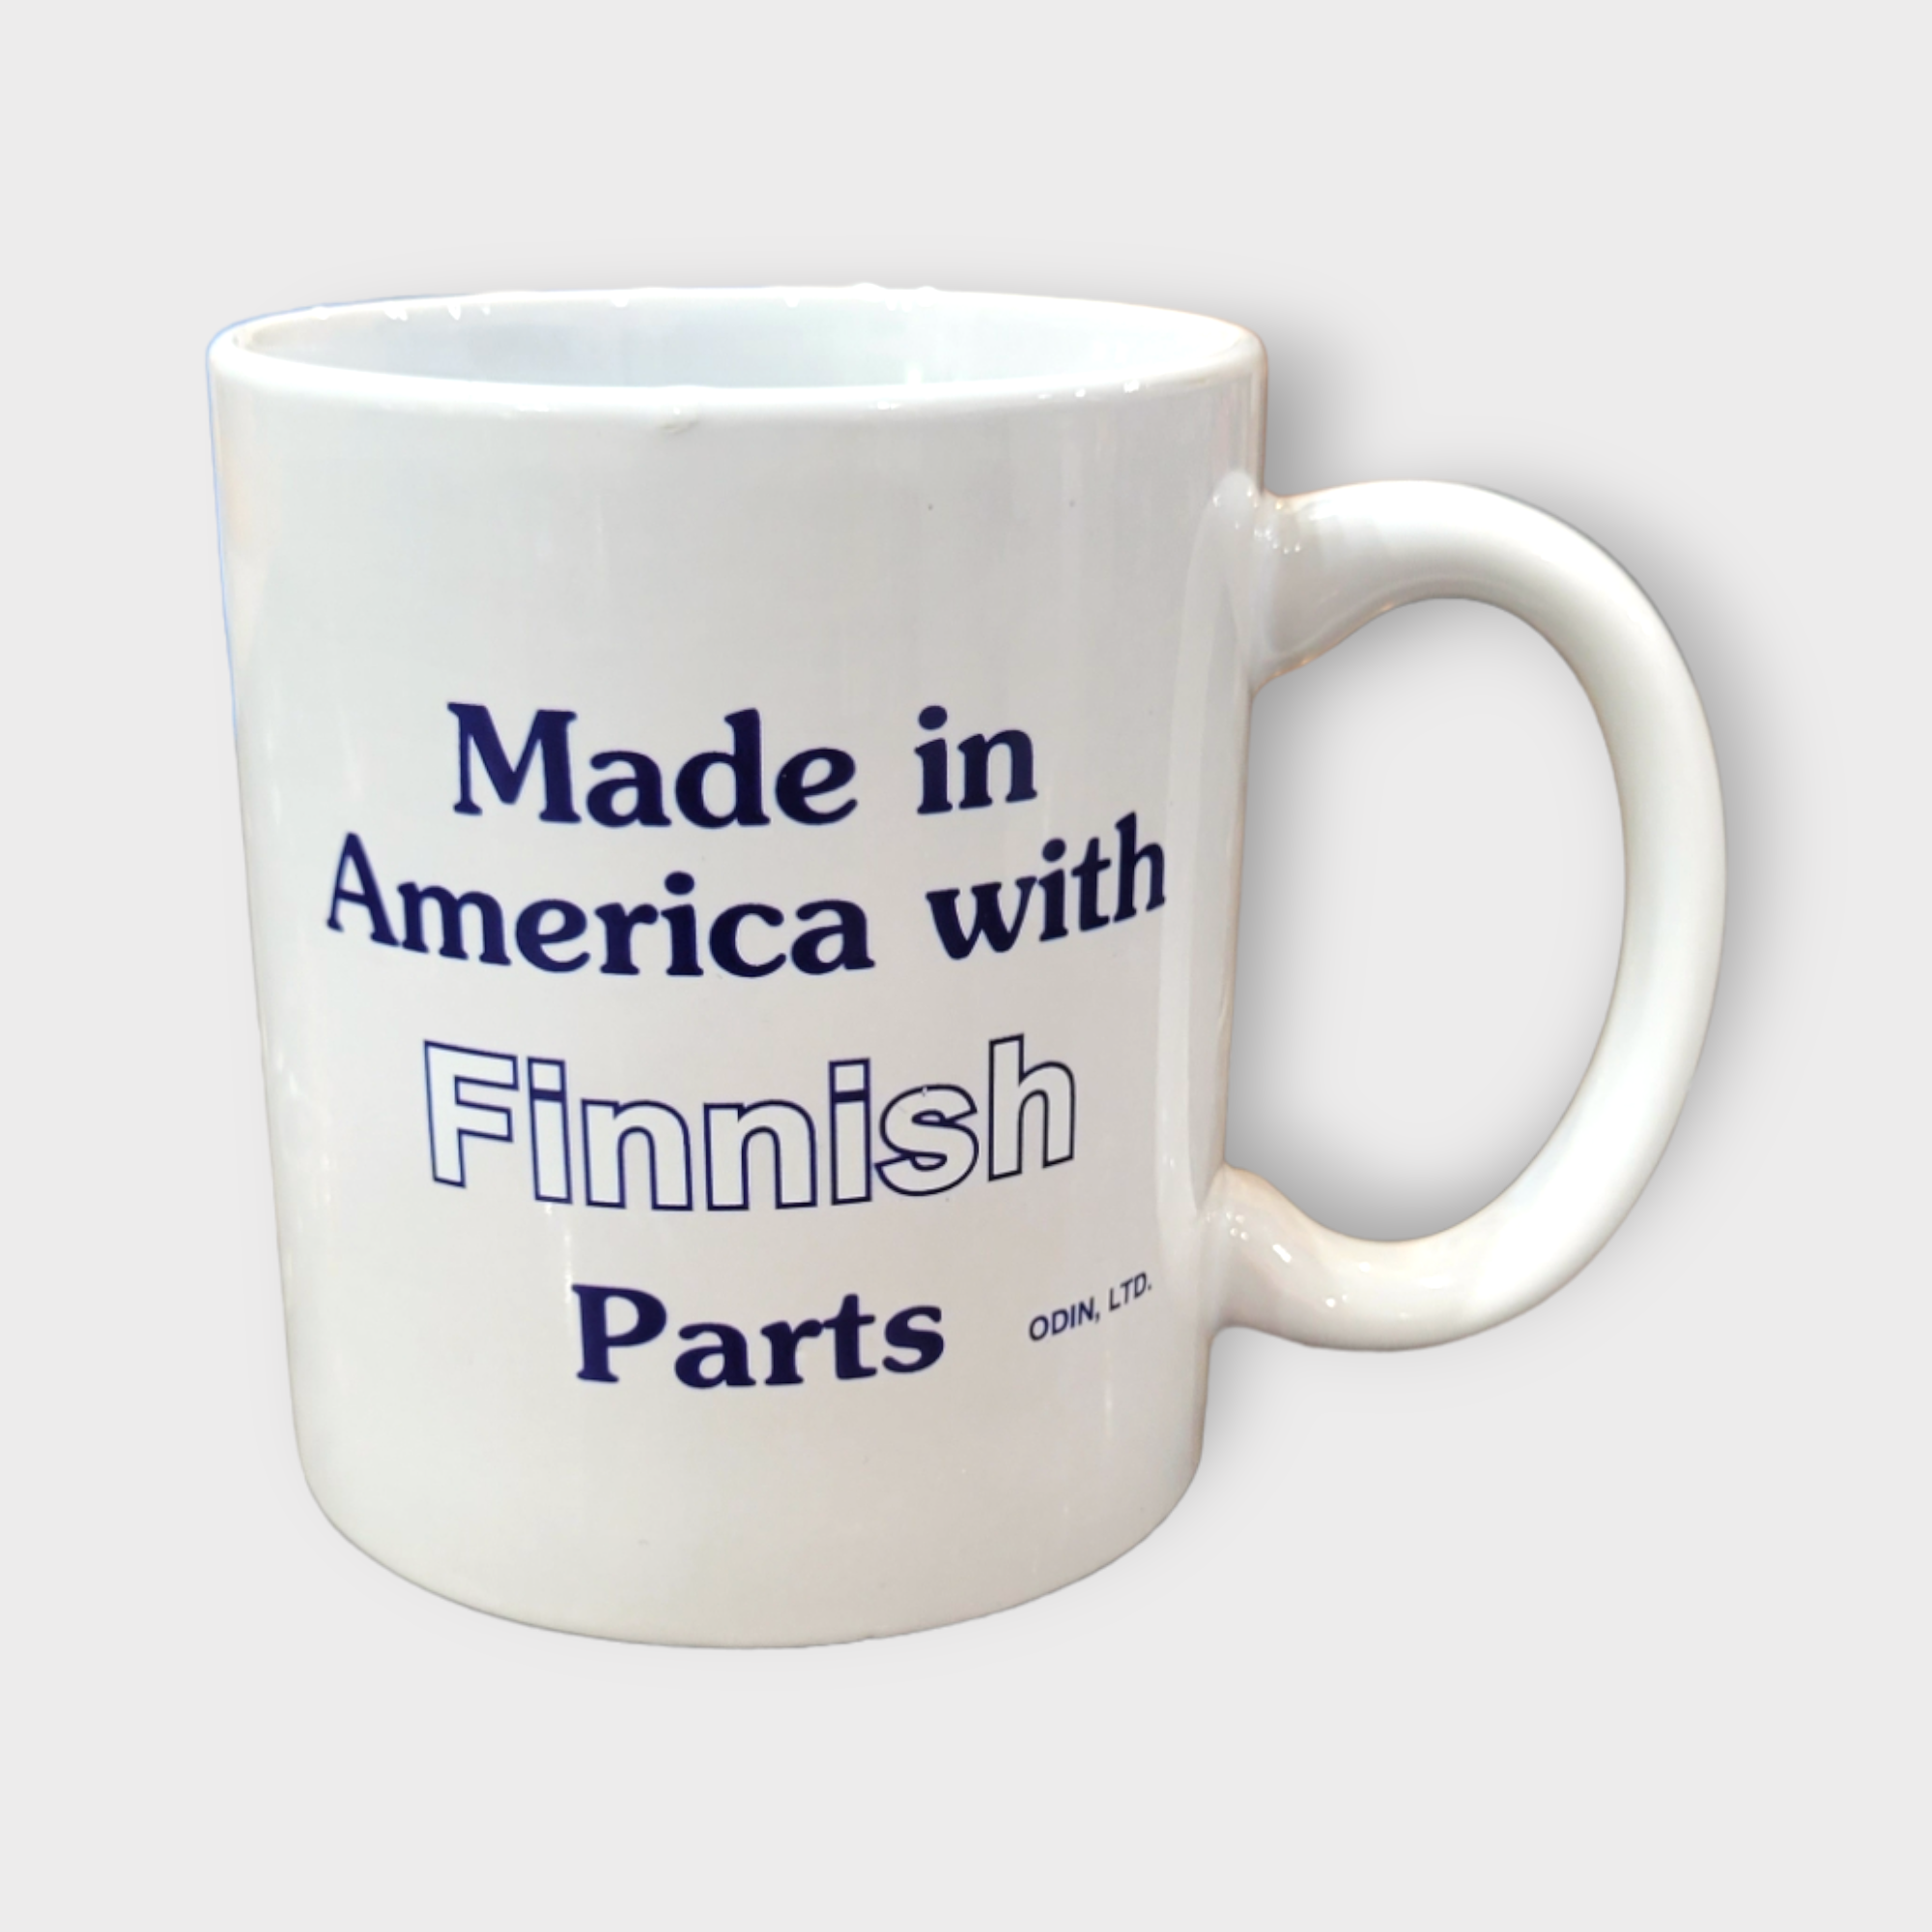 Mug: "Made in America with Finnish Parts" (11oz)